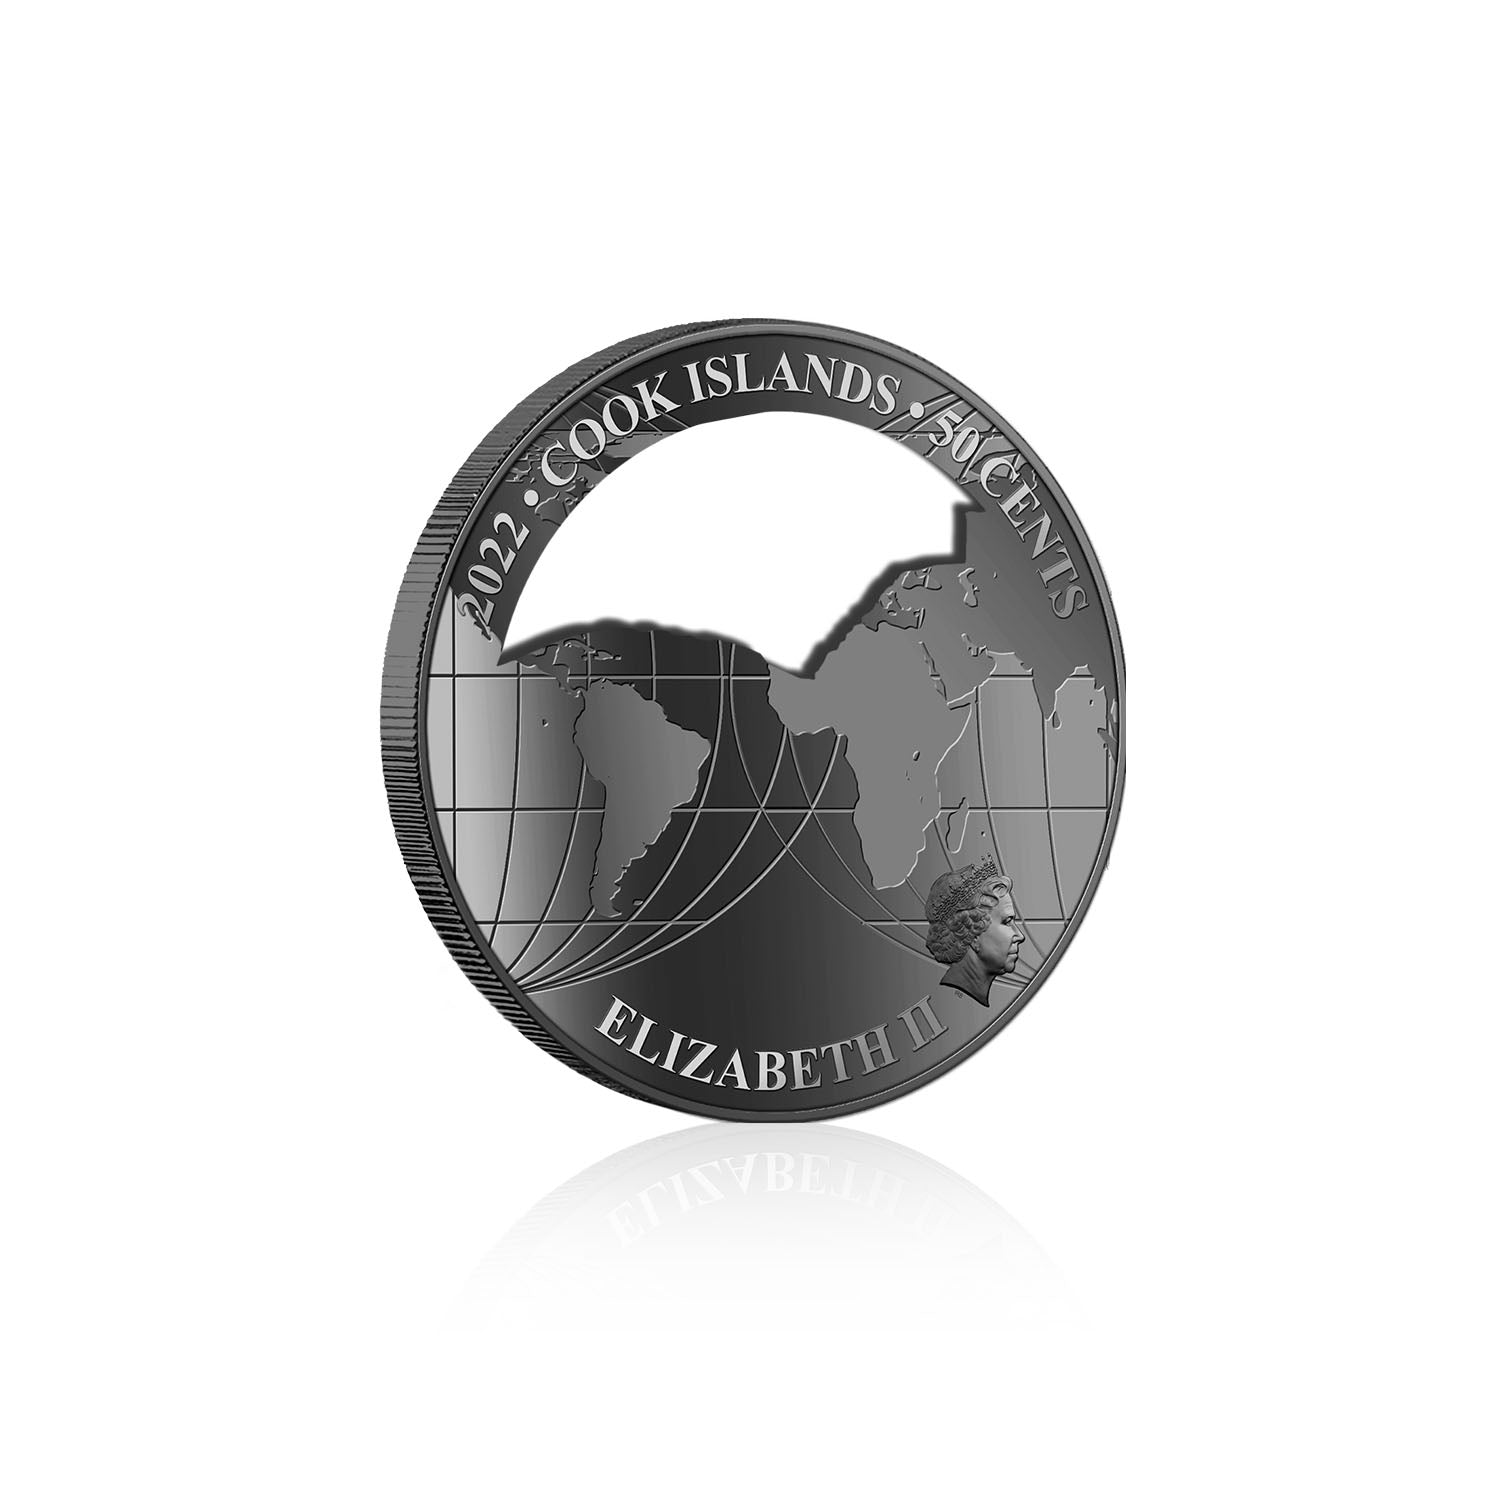 Landmarks of the World - The Great Wall of China Coin